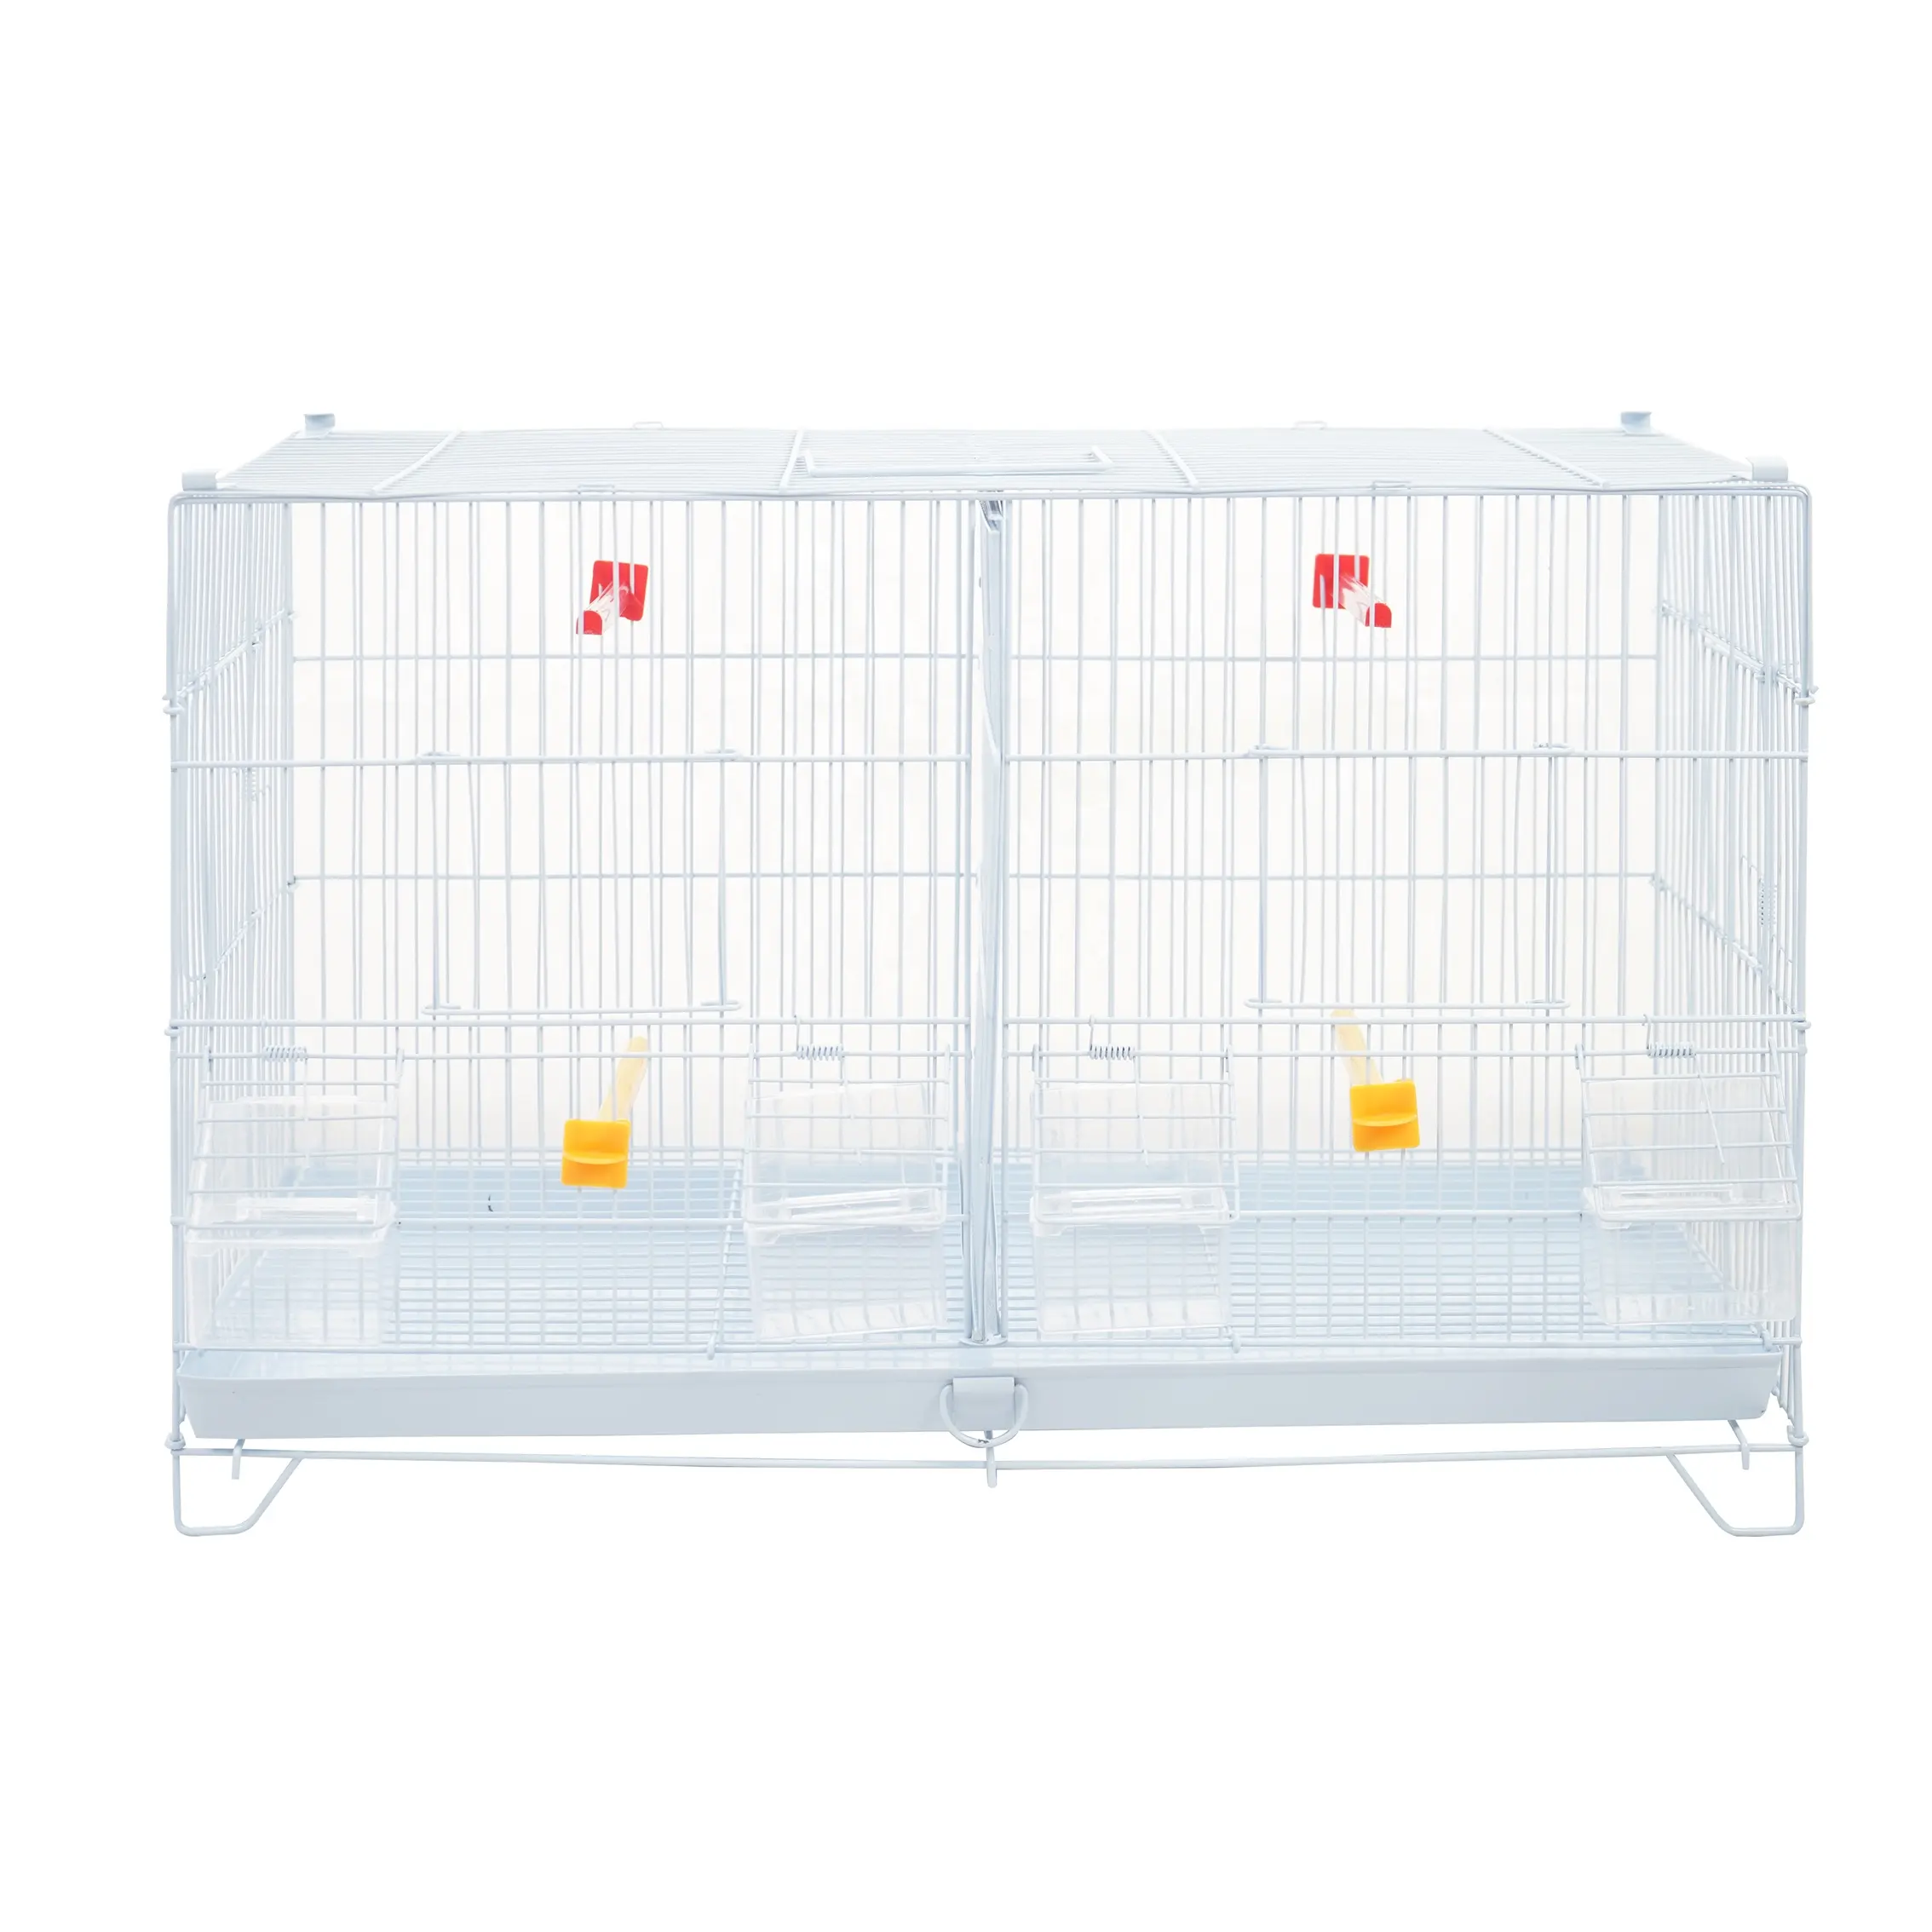 Hunting Small For African Lovebirds Stainsteel Gold Set Breeding Canary Flight Extra Large Bird Cage